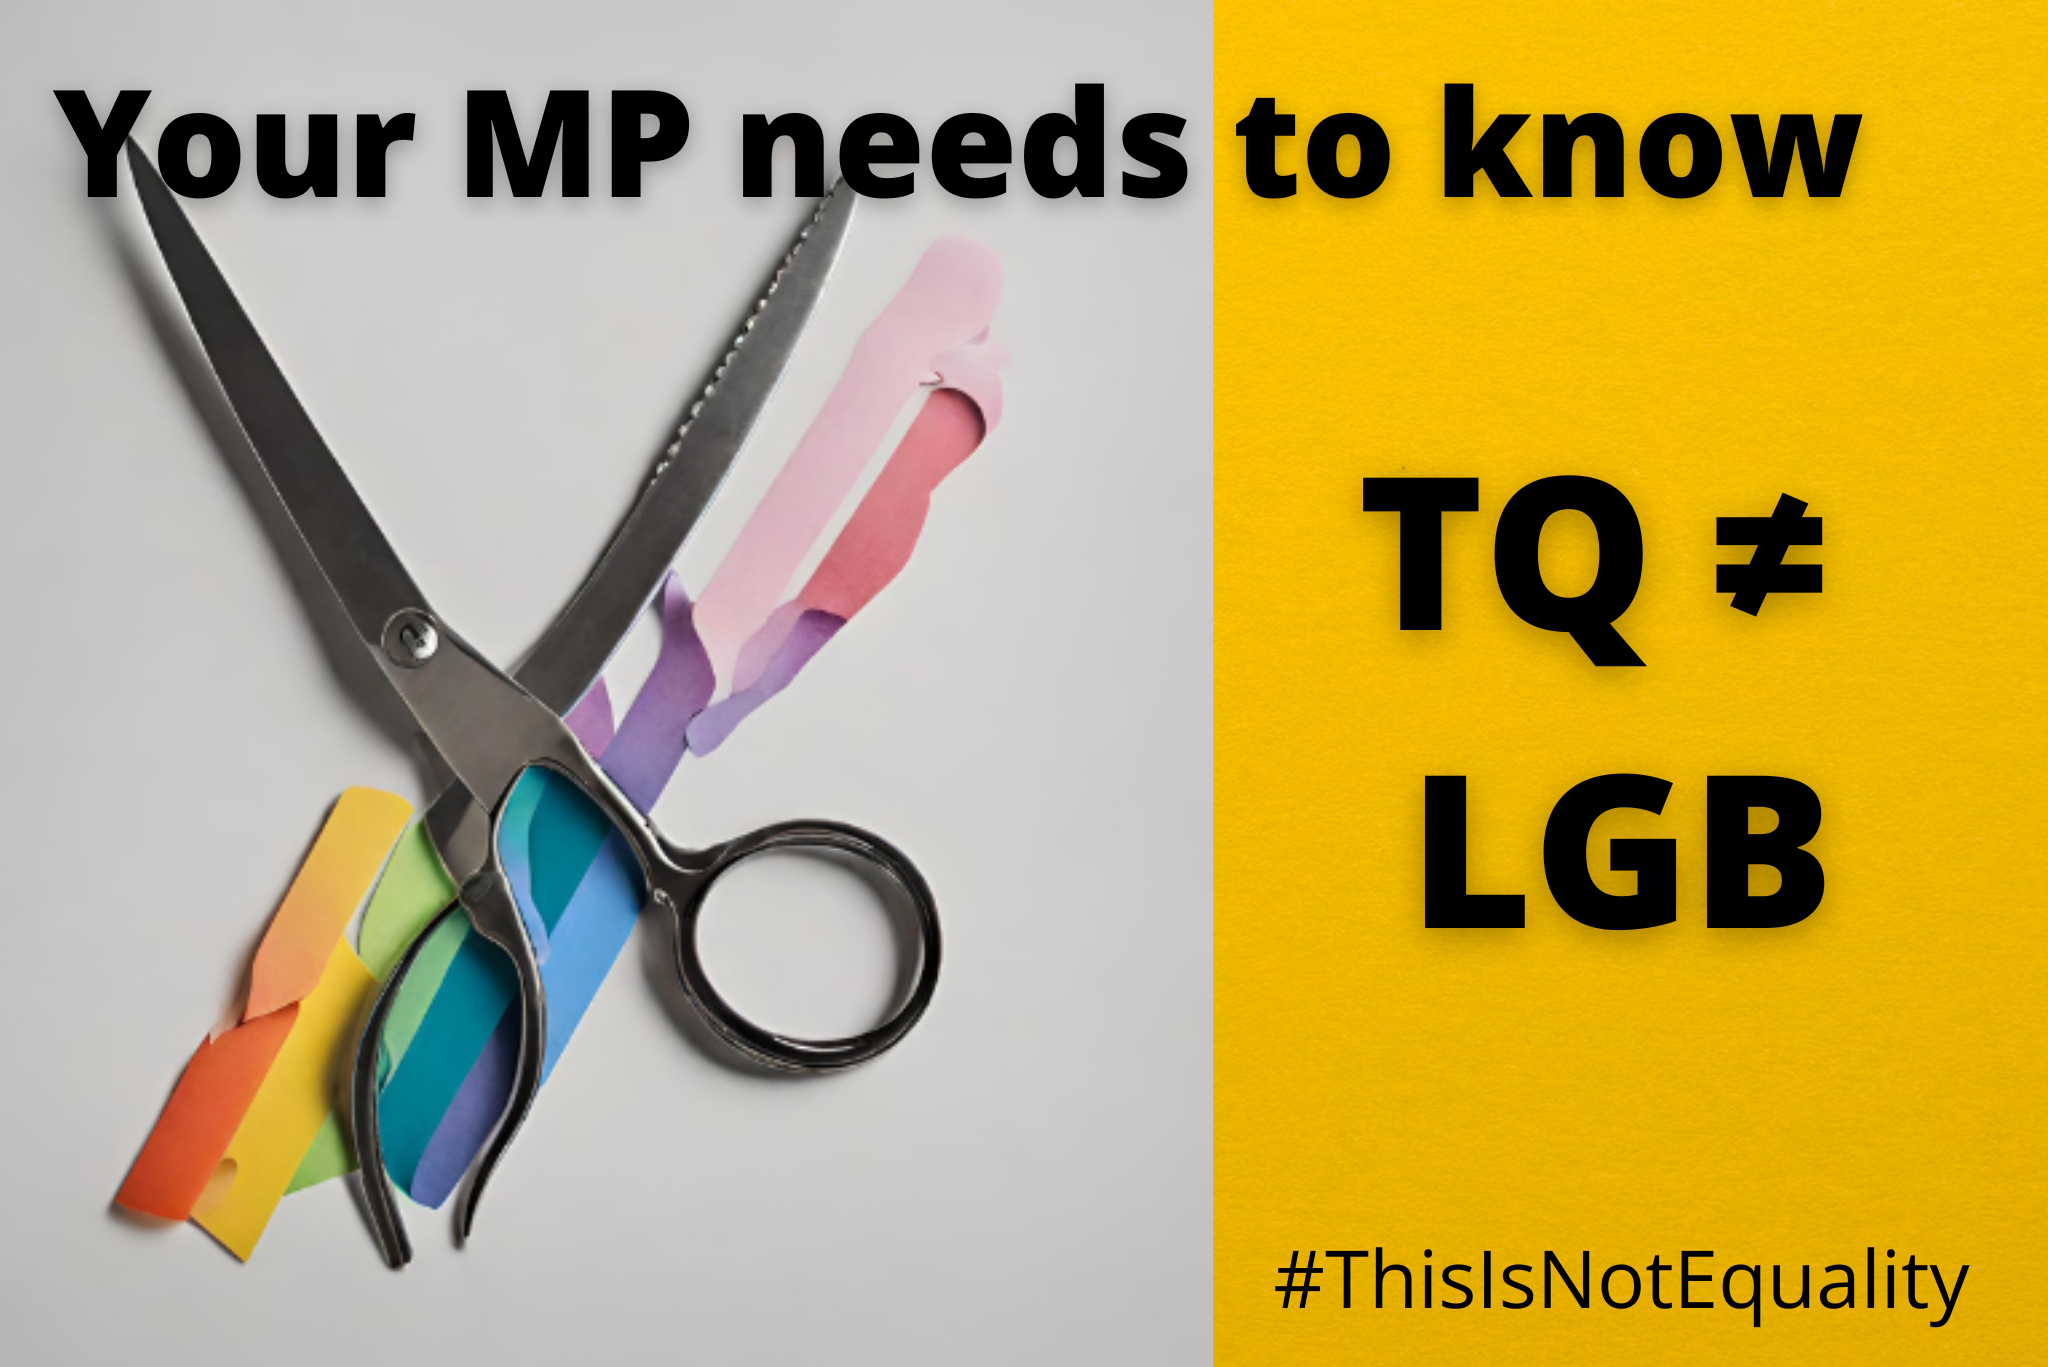 Tell your MP: TQ is not LGB